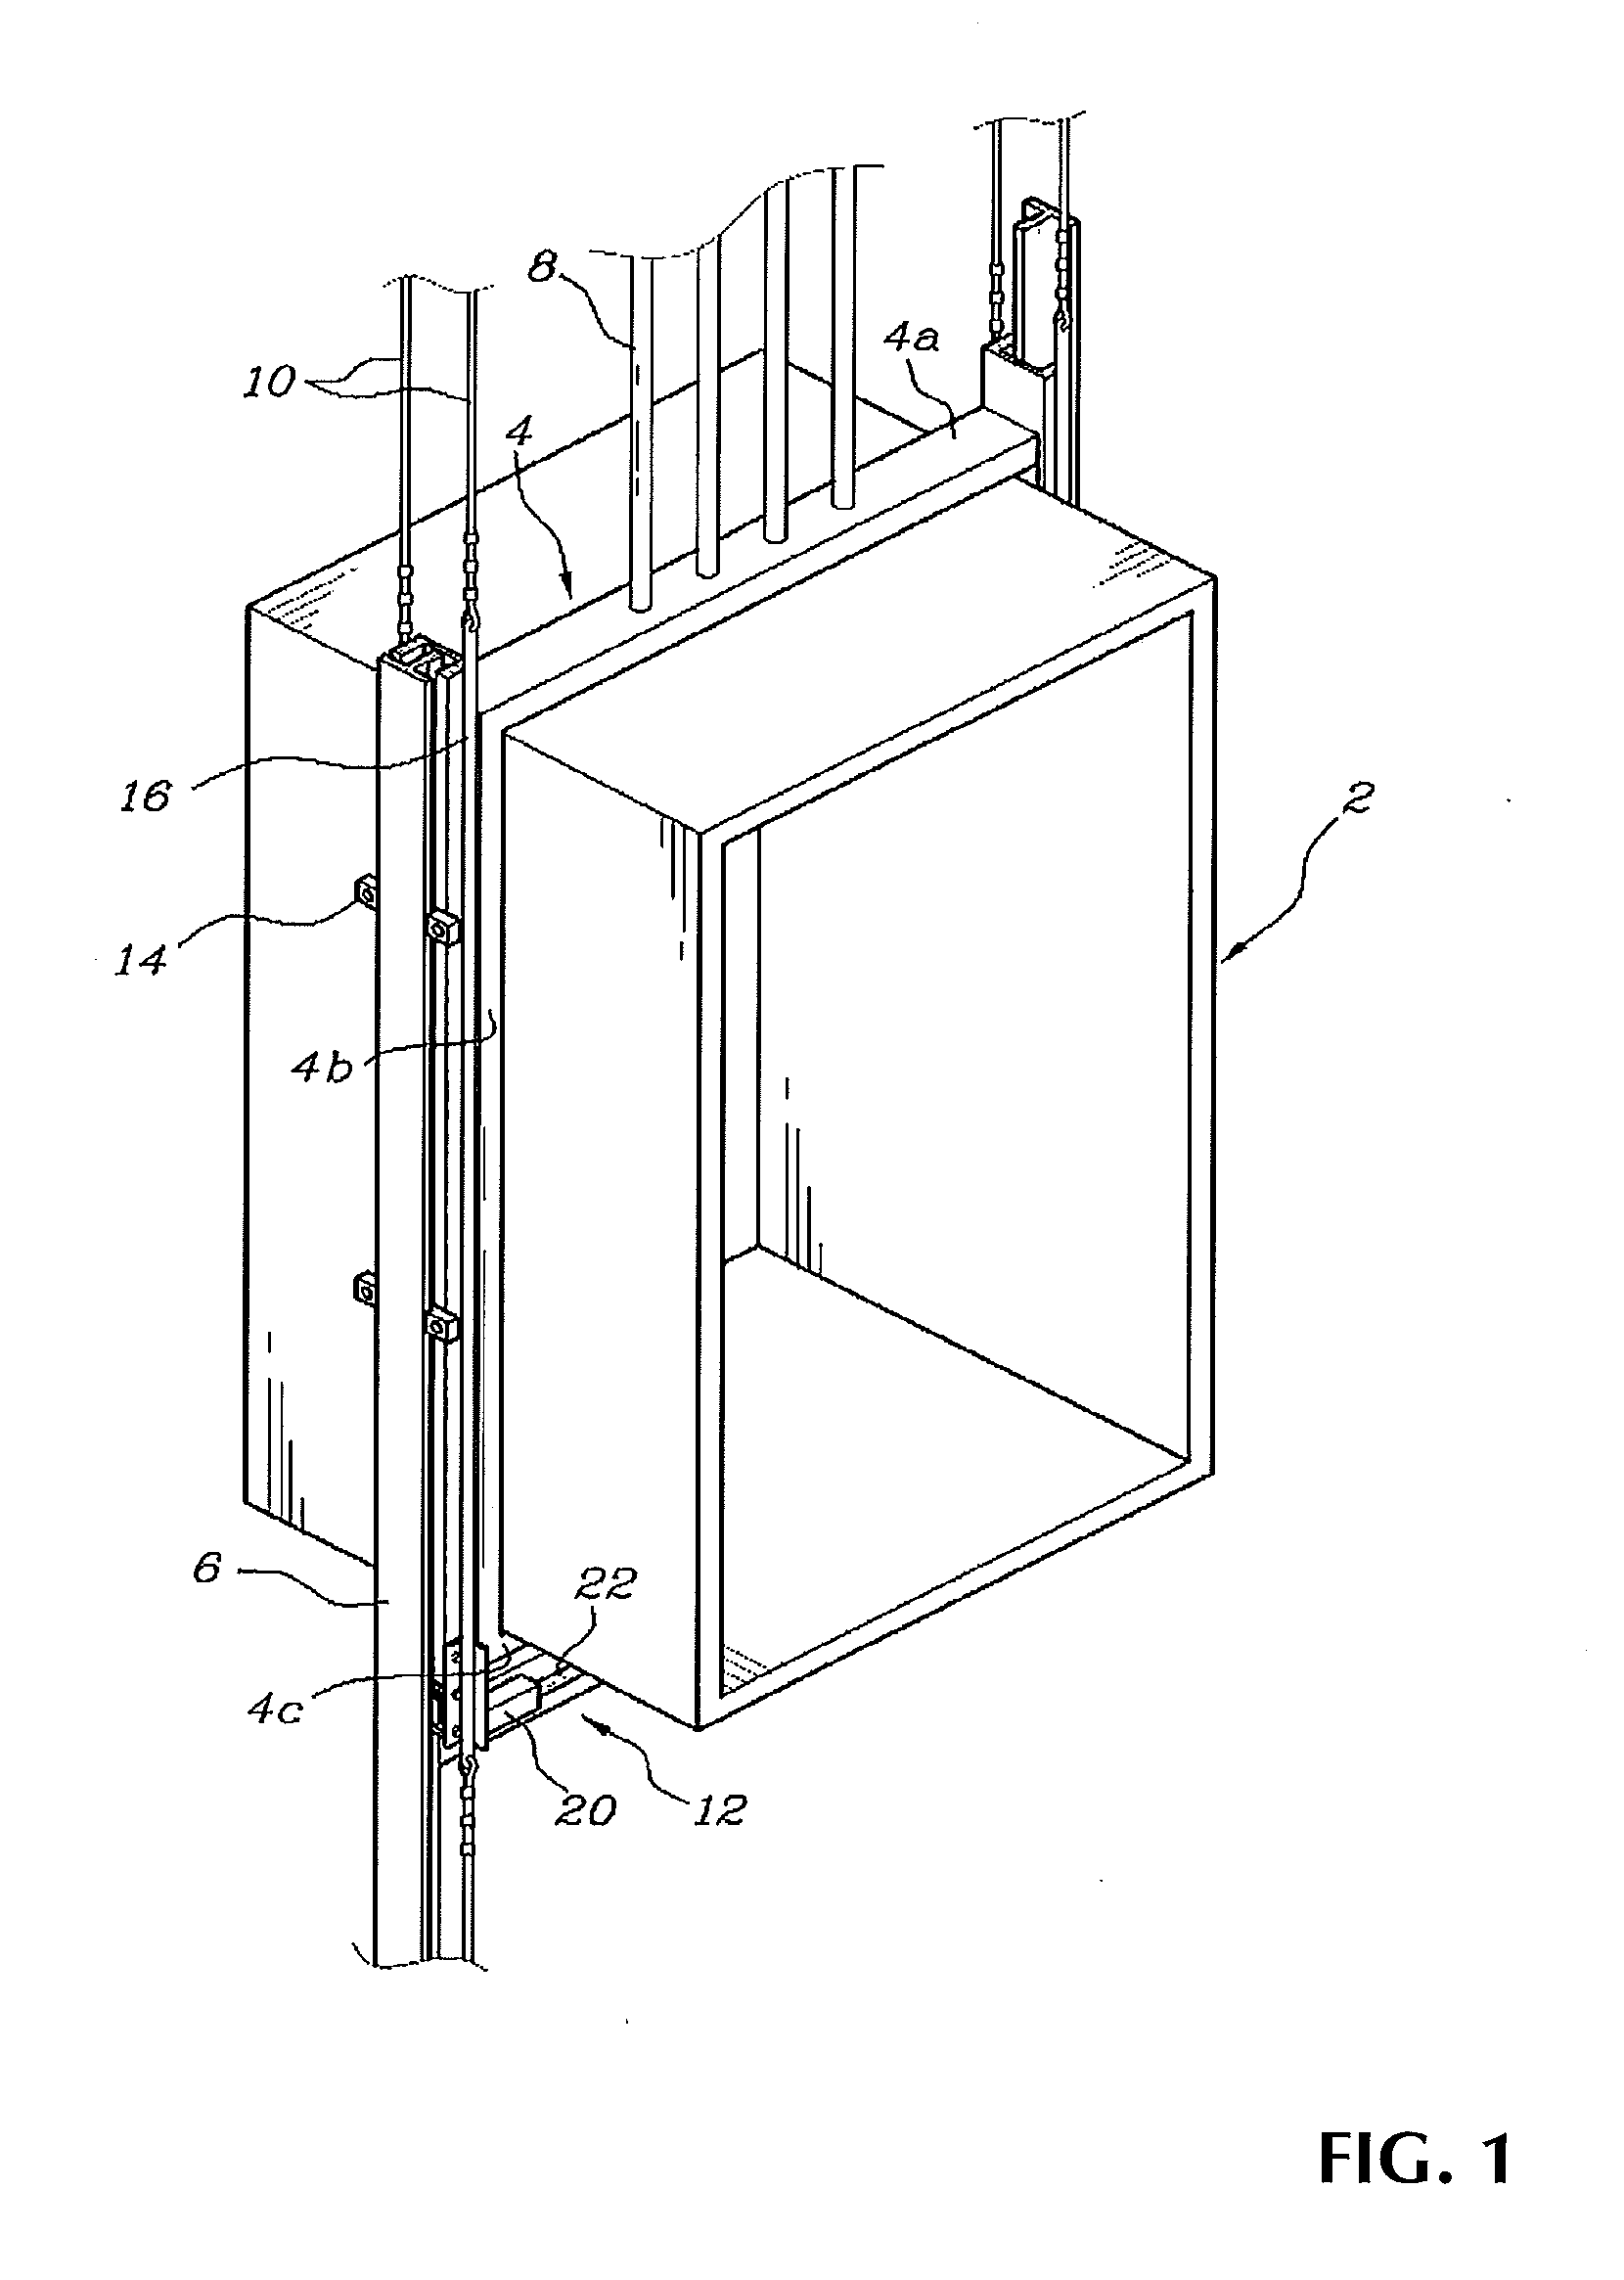 Emergency stop device with attached hand brake system